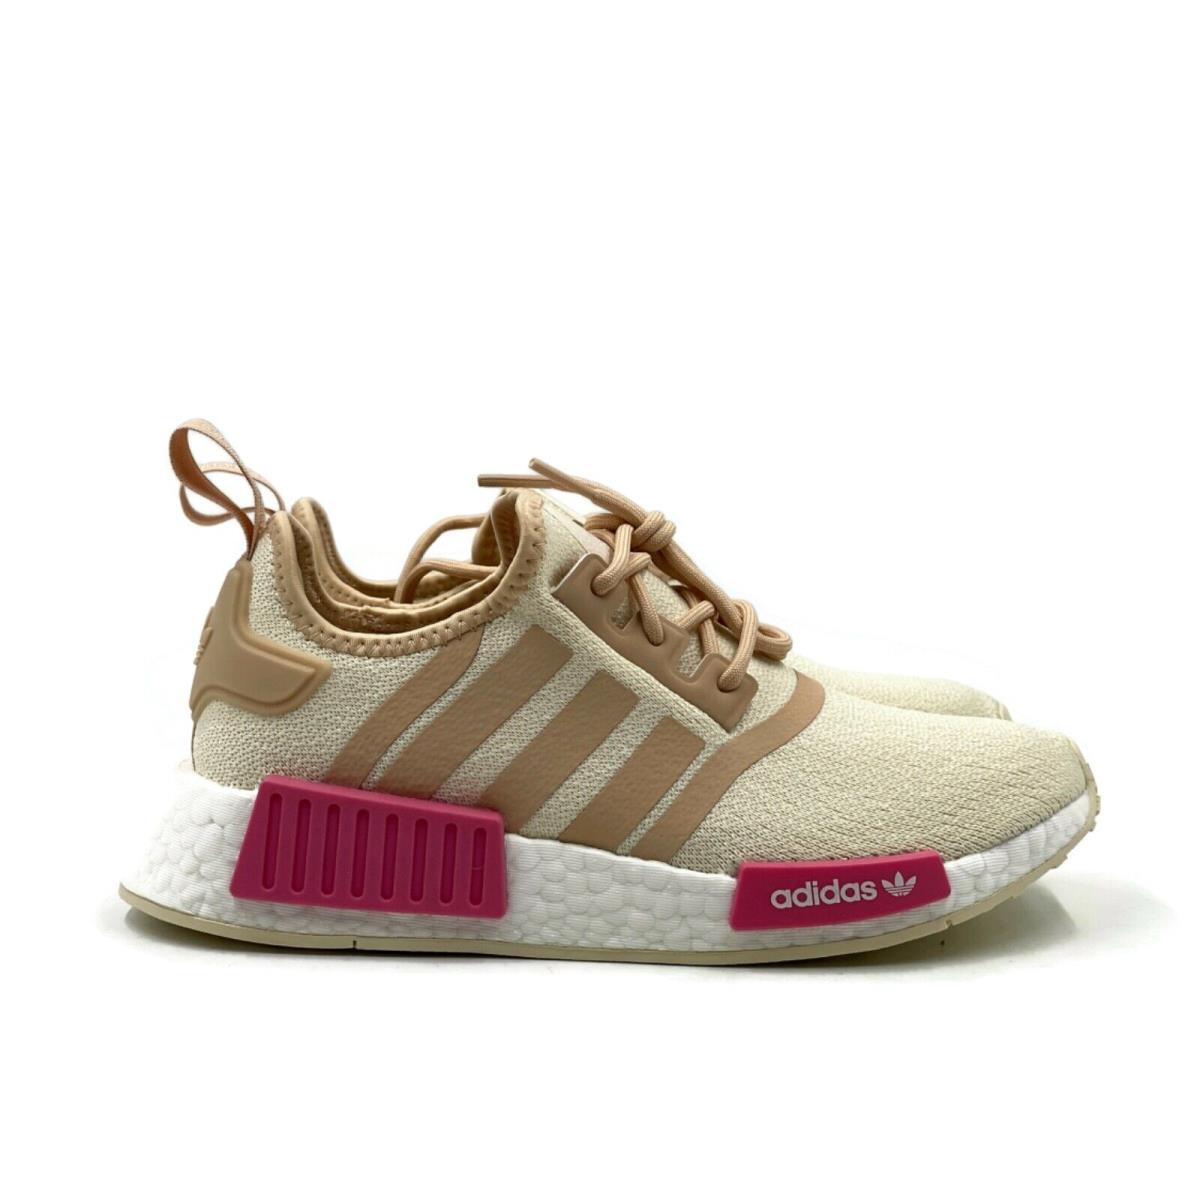 Adidas Nmd R1 Womens Casual Running Shoe Off White Pink Athletic Trainer Sneaker